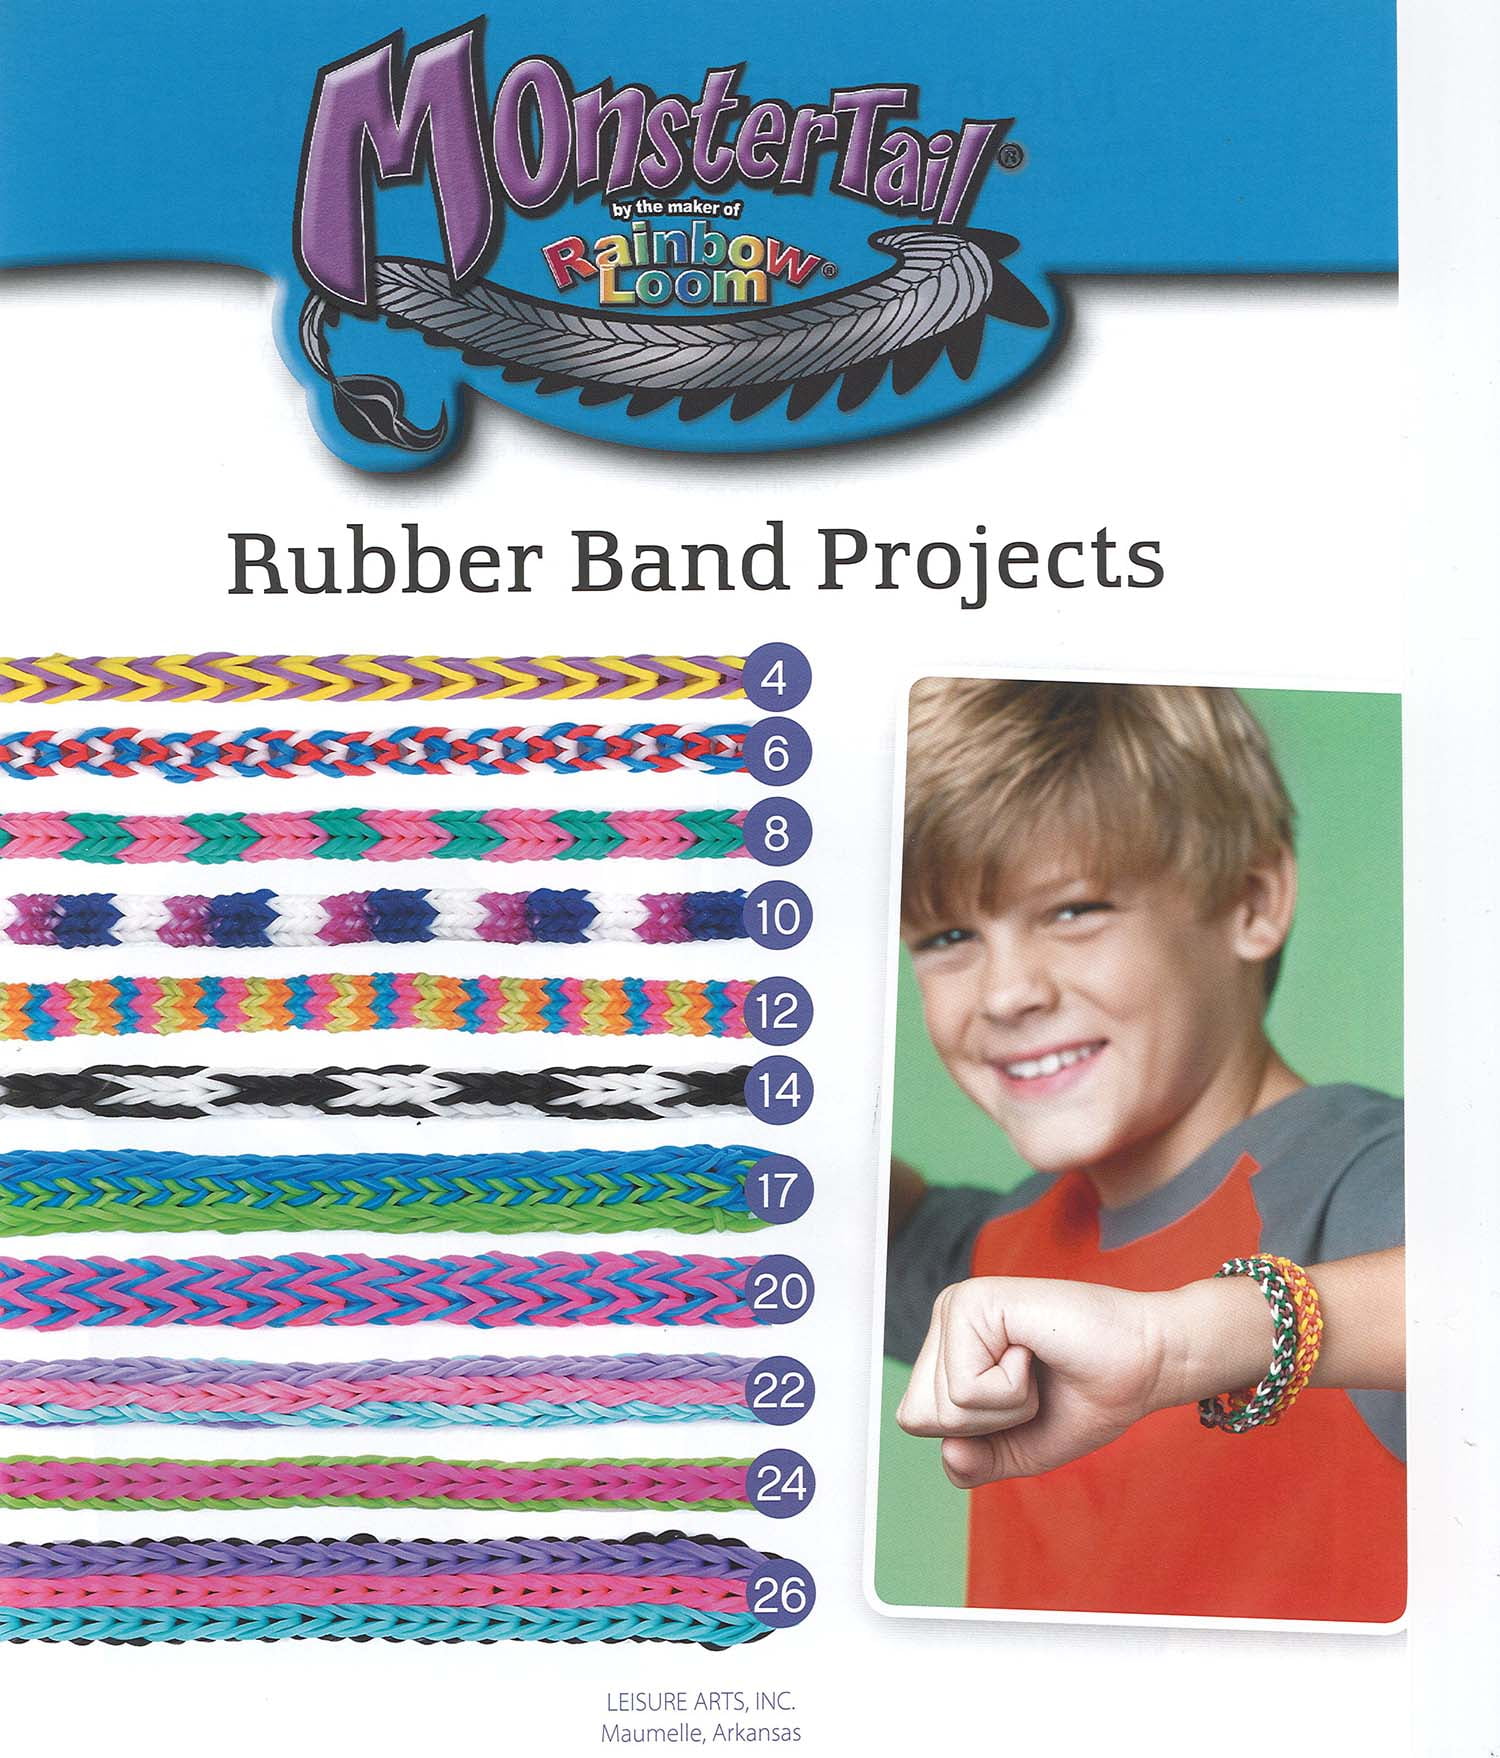 Rubber Band Loom Crafts [Book]